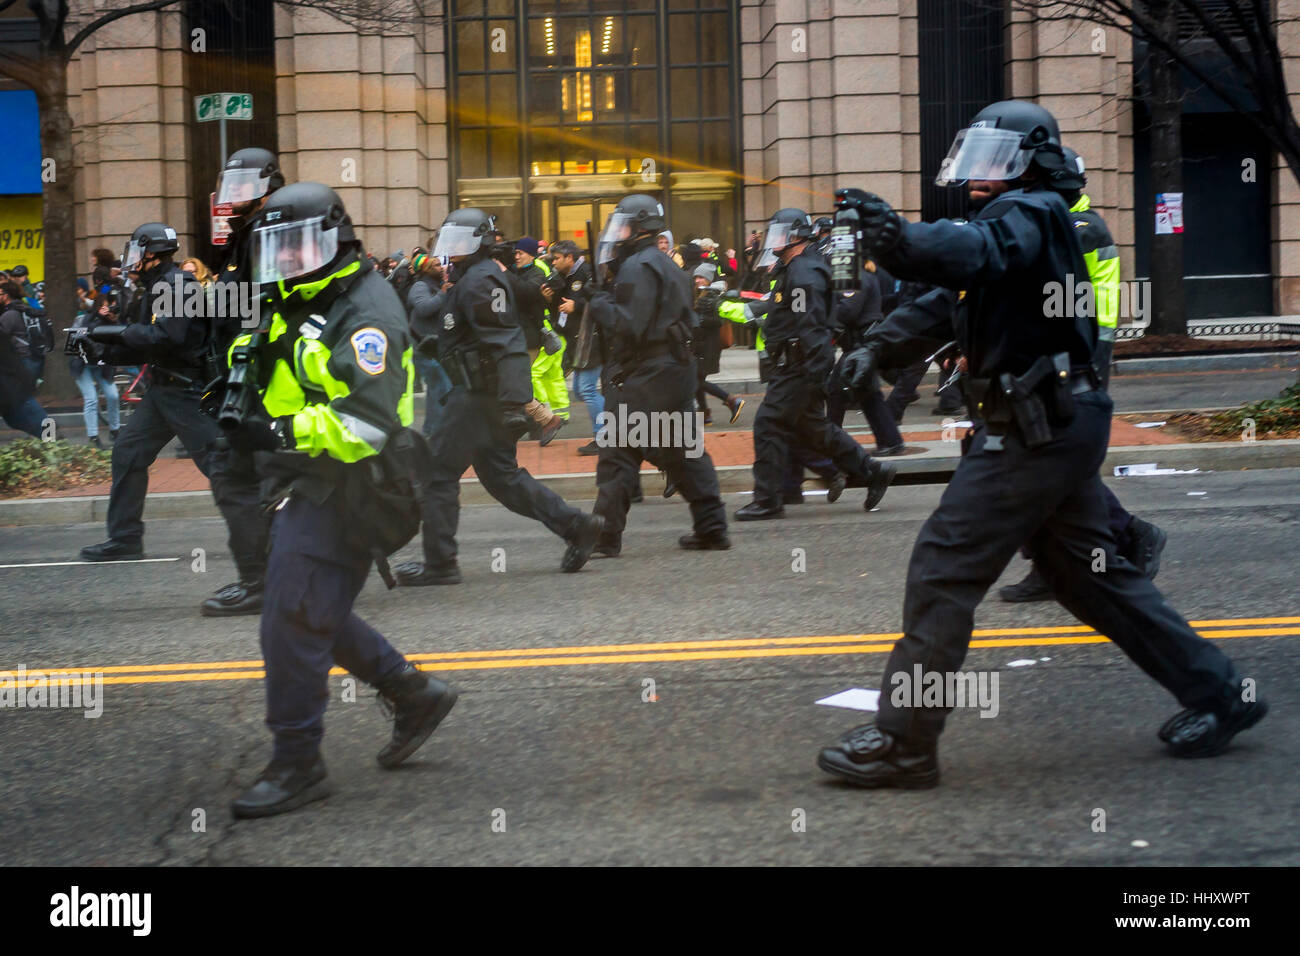 Washington, USA. 20th Jan, 2017. Hours after Donald Trump was inaugurated as the 45th President of the United States, On January, 20, 2017, protesters clashed with riot police, who responded with pepper spray, tear gas, rubber bullets and flash grenades. Credit: PACIFIC PRESS/Alamy Live News Stock Photo